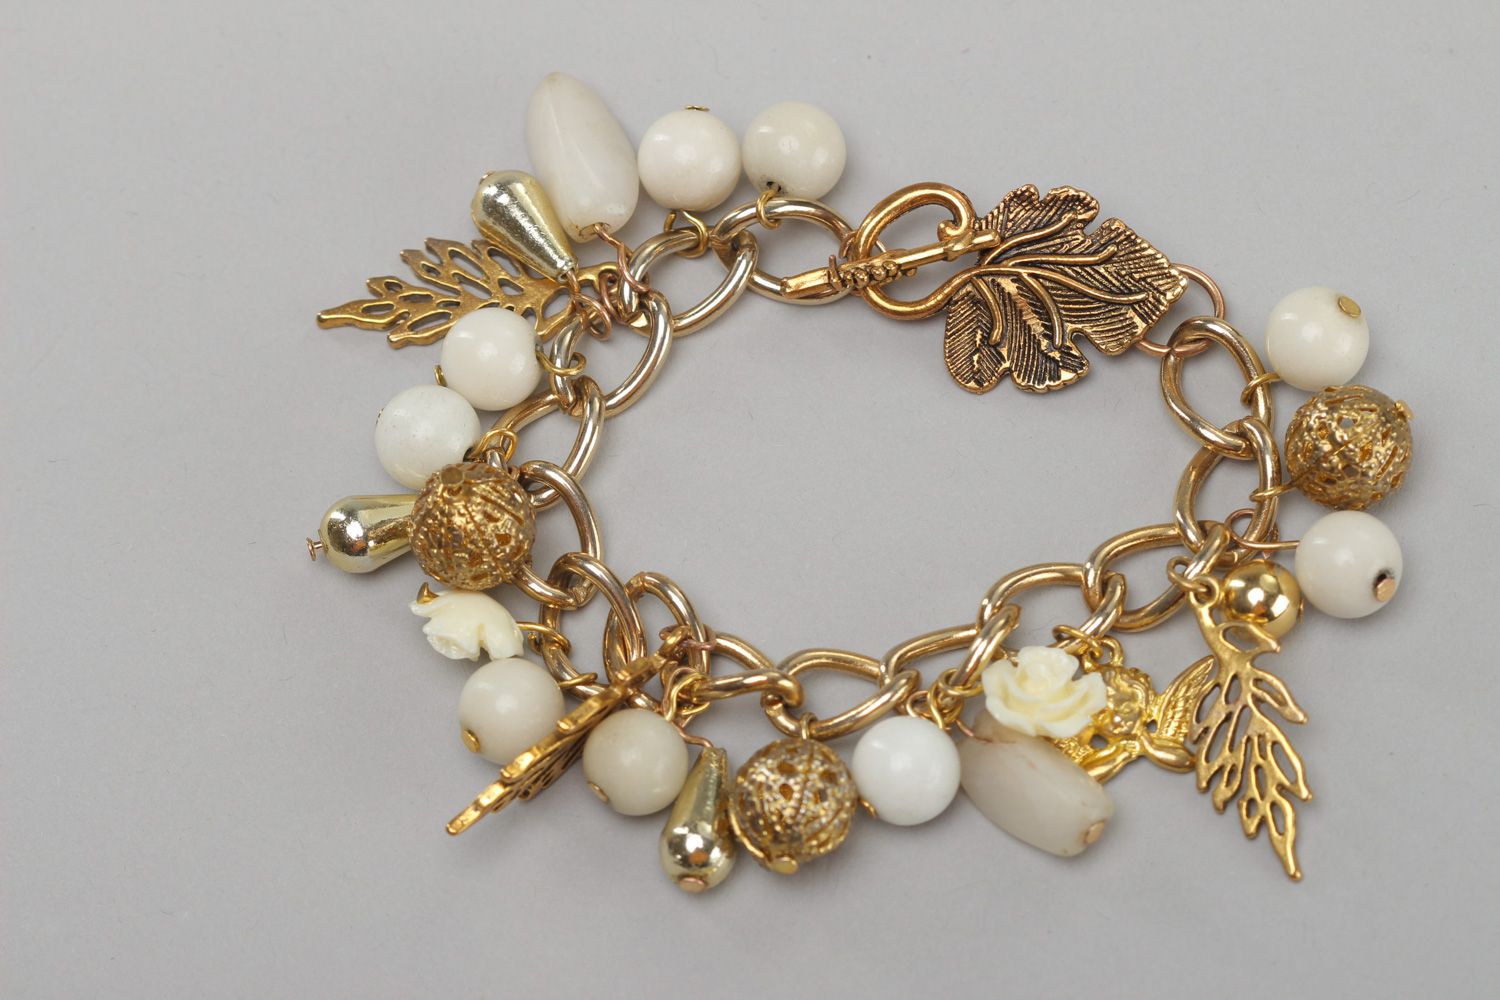 Handmade women's wrist bracelet with charms and beads of white and gold color photo 2